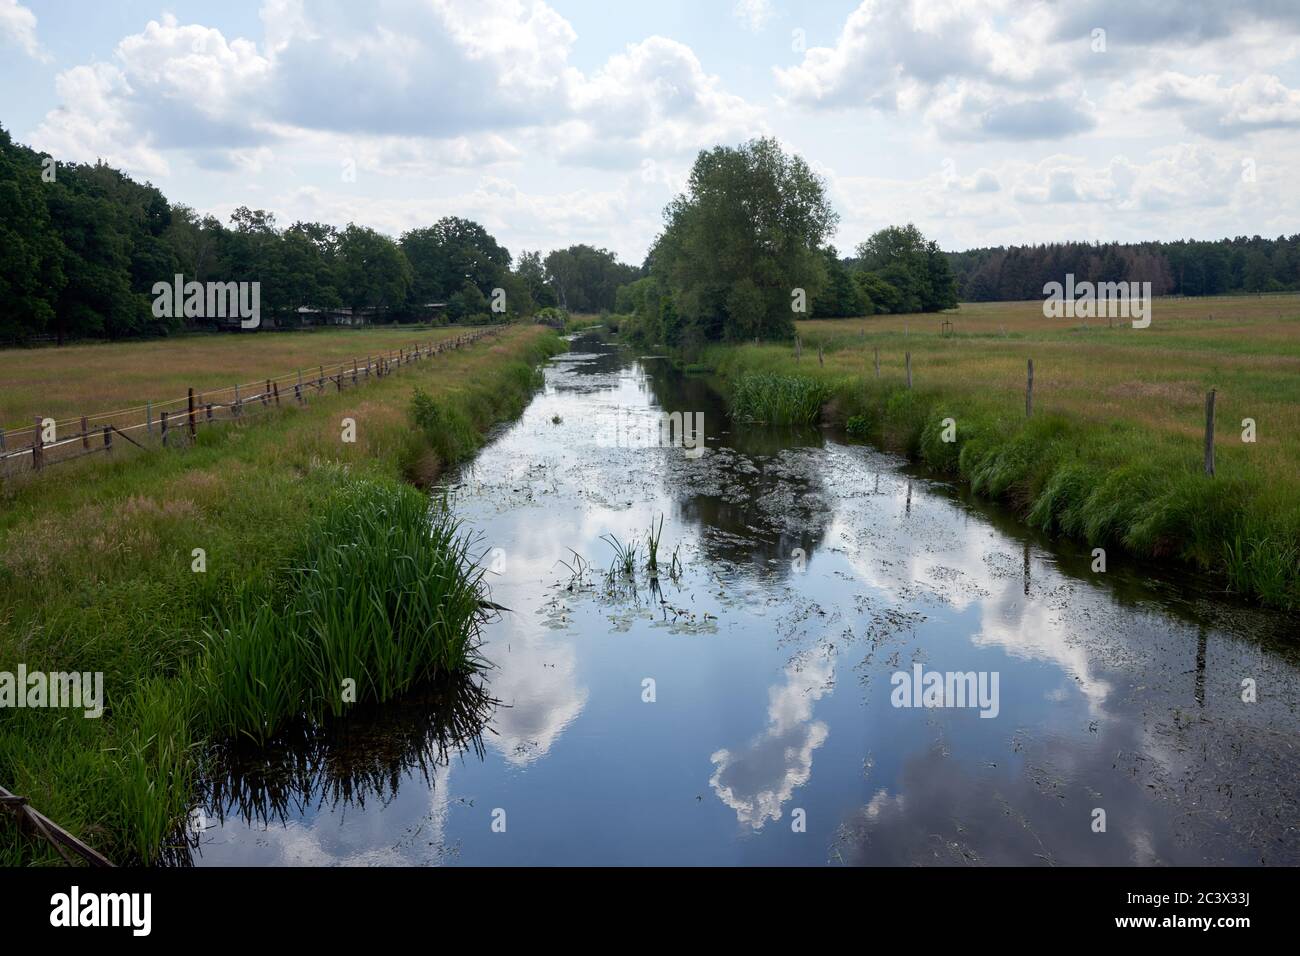 The river Aller flows sluggishly through the meadows near Gifhorn, with fences at the edge and individual bushes and trees, cloud reflections in the w Stock Photo